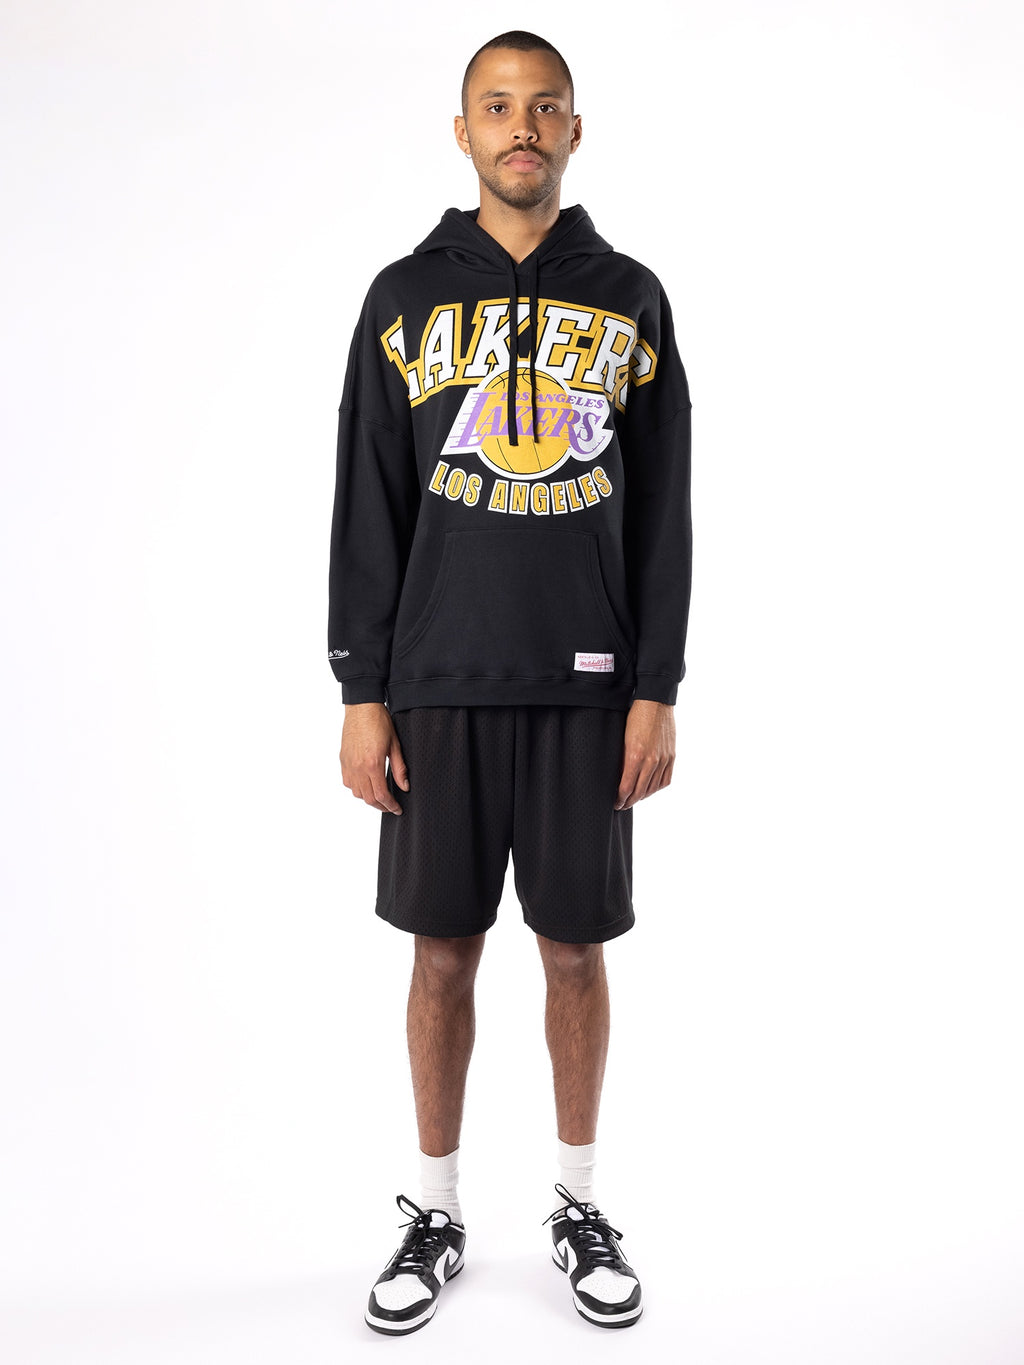 MNA-O19 (Vintage xl invert arch hoodie lakers faded black) 32296521 MITCHELL AND NESS